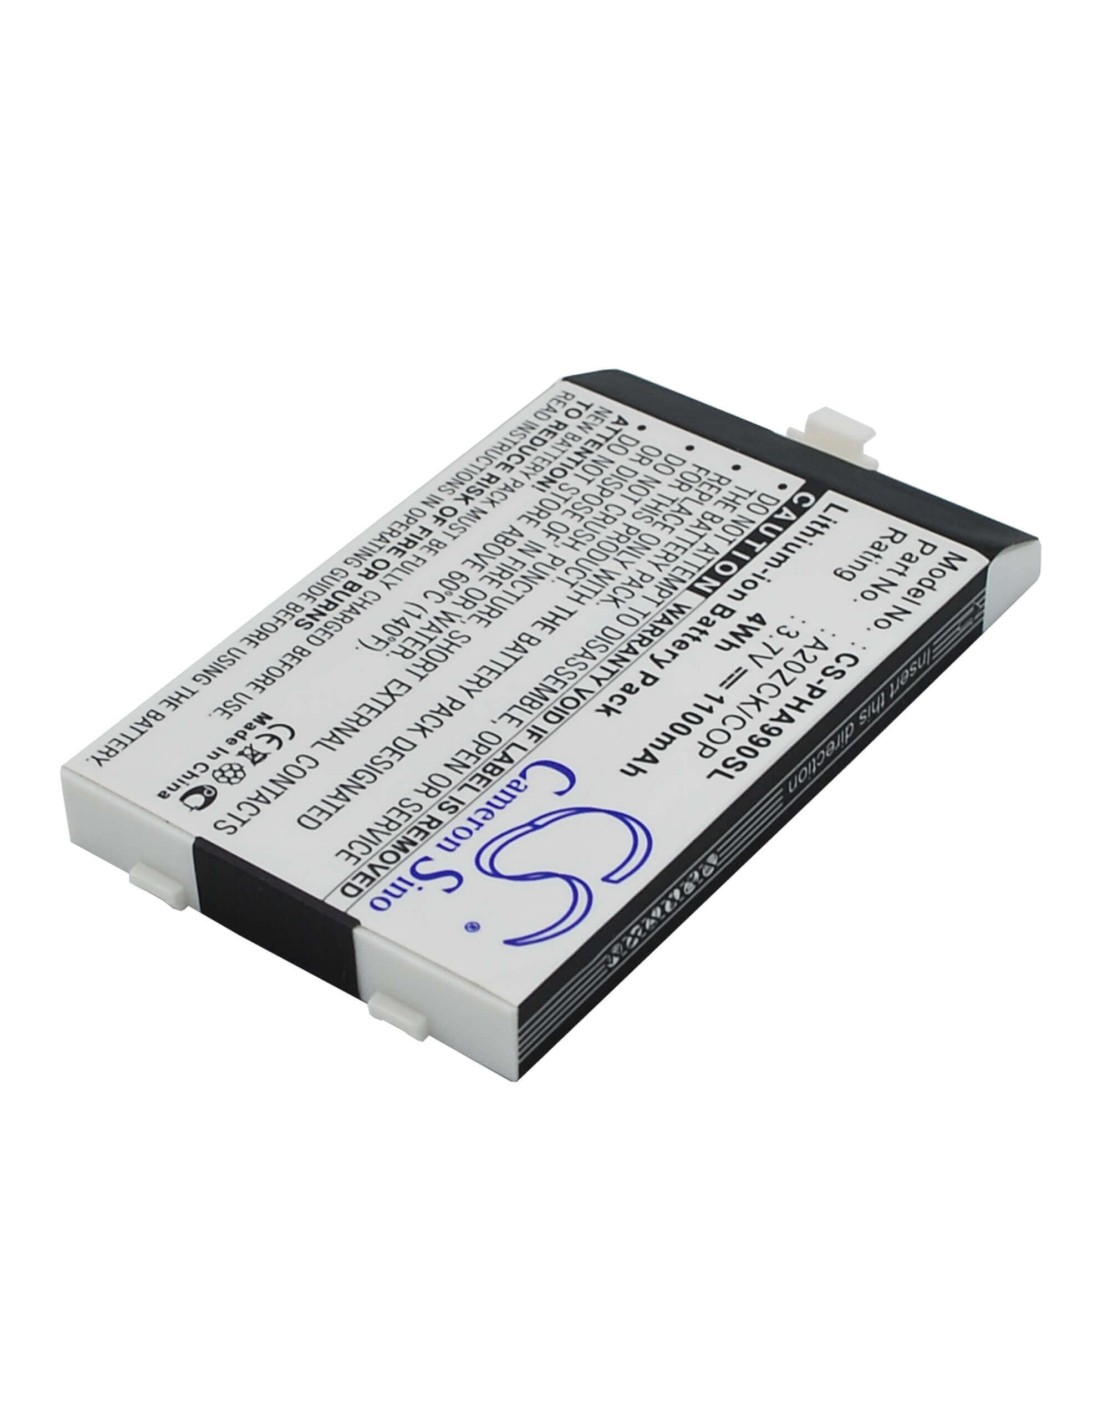 Battery for Philips Xenium 9A9A, Xenium 9@9D 3.7V, 1100mAh - 4.07Wh